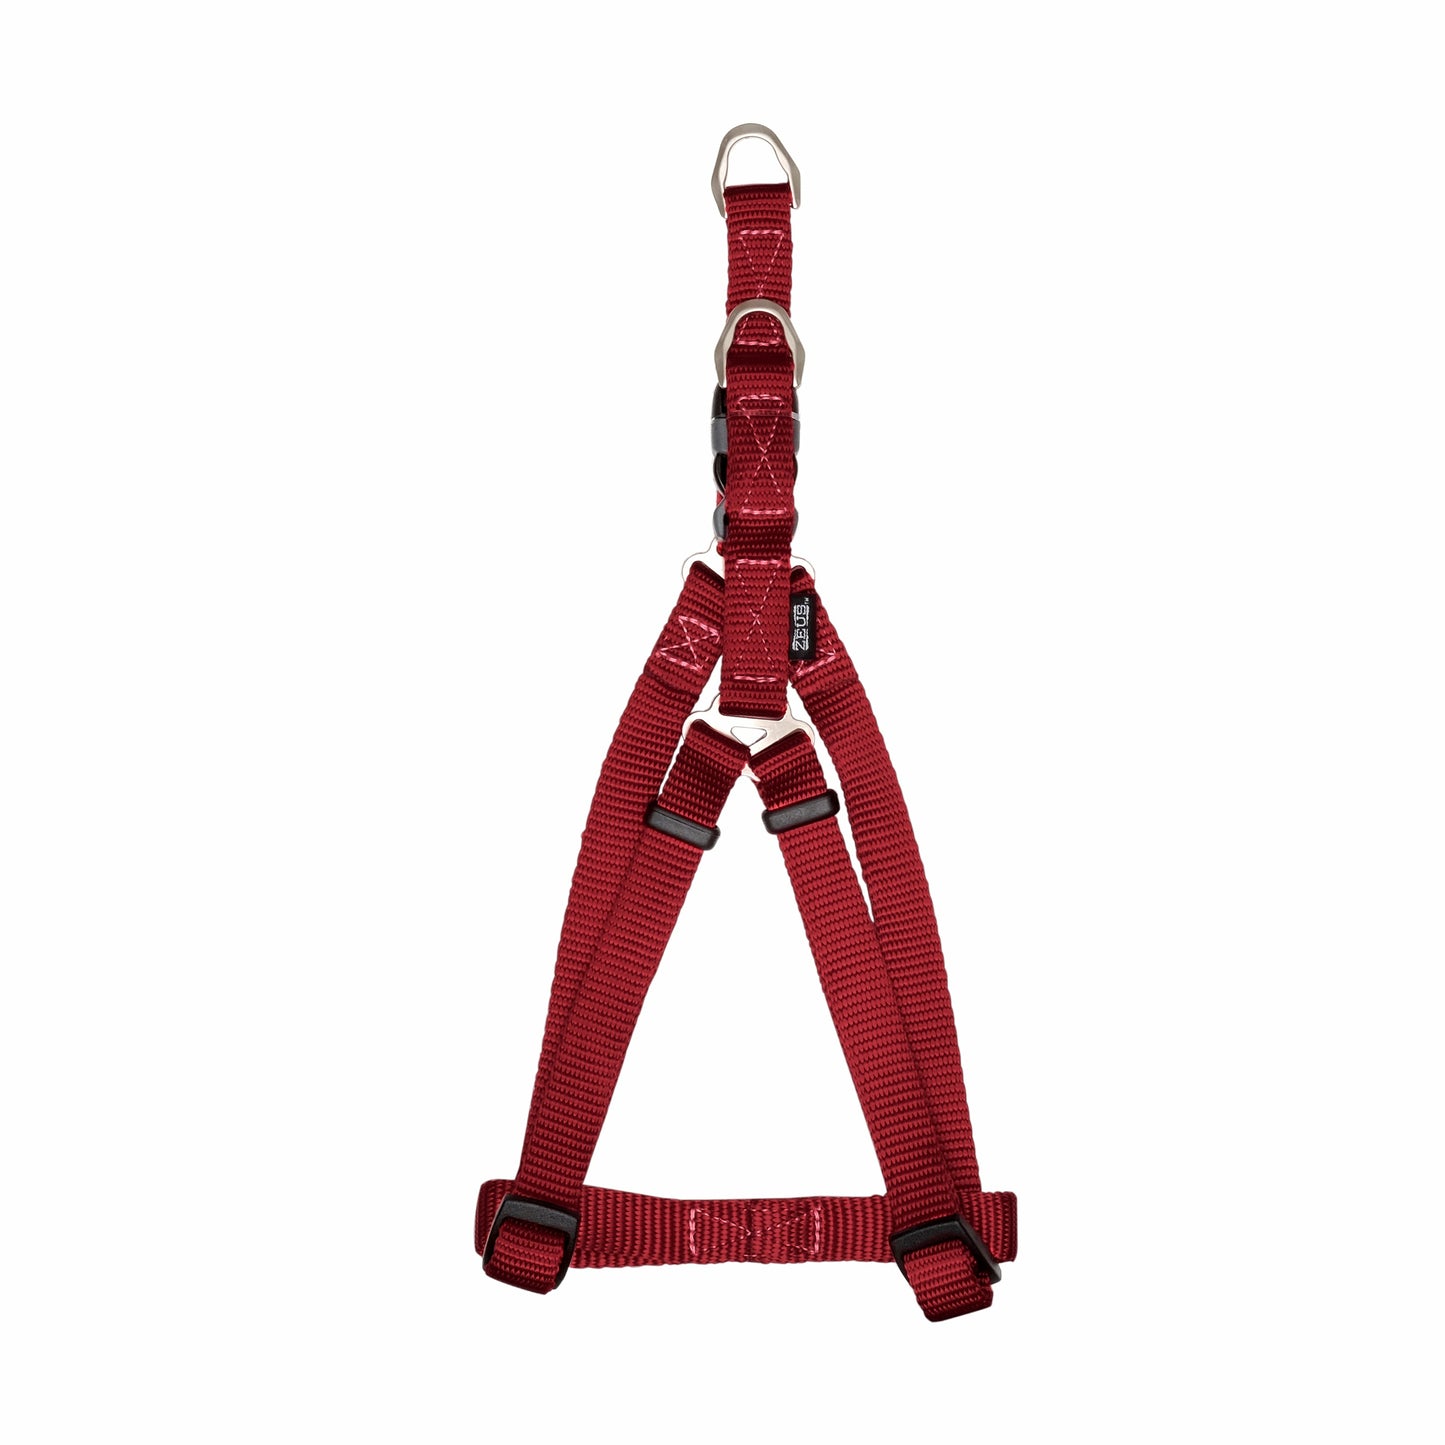 Zeus Nylon Dog Harness Deep Red Sm: 3/8 x 13-18 in Harnesses Sm: 3/8 x 13-18 in | PetMax Canada